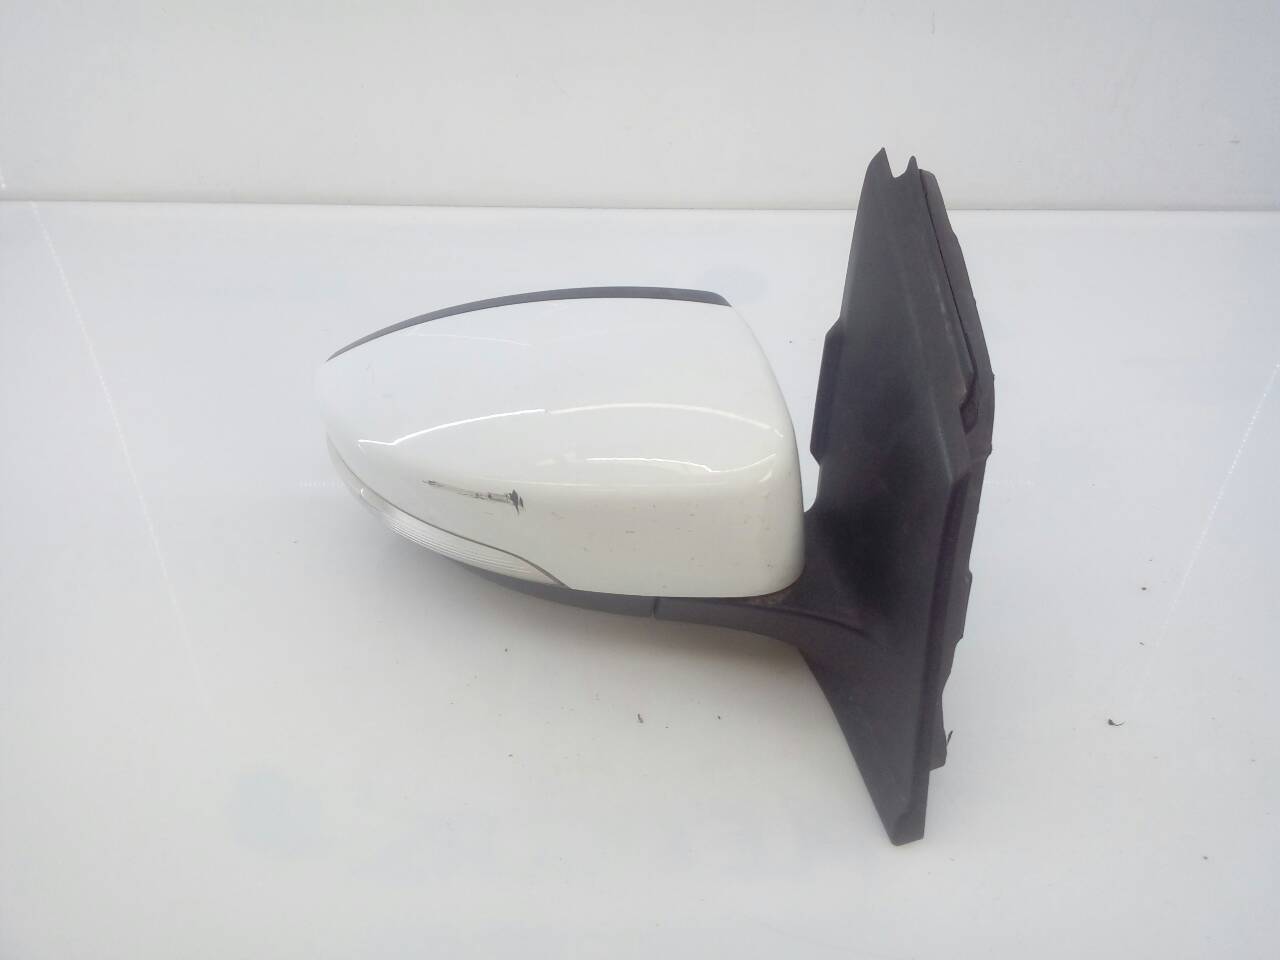 FORD Kuga 2 generation (2013-2020) Right Side Wing Mirror 036672, 026672, E2-B3-3-2 18647094